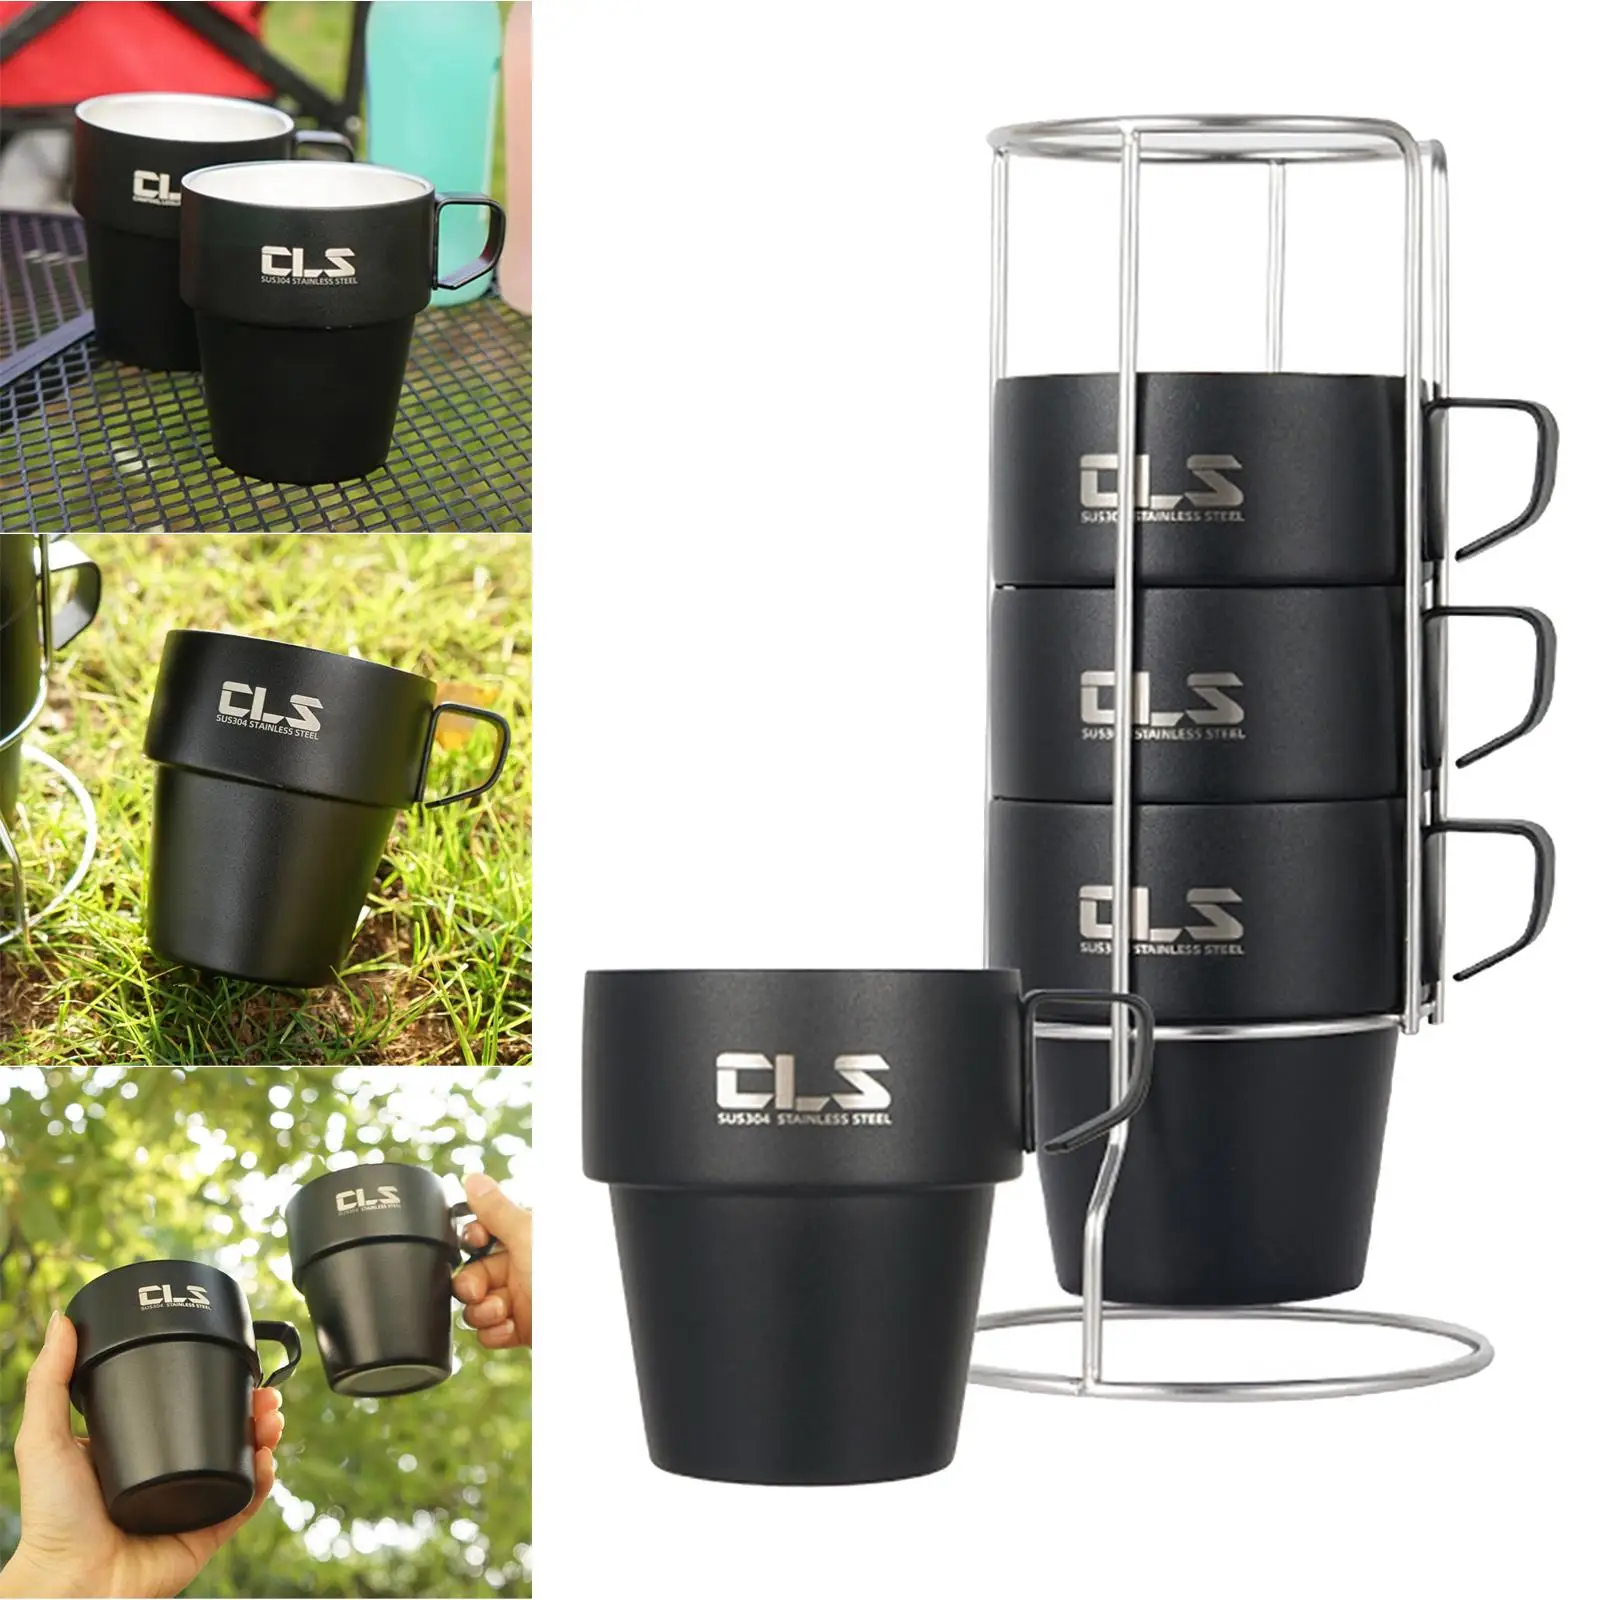 4x Double Cups Durability with Cup Holder Milk Cookware for Mountaineering